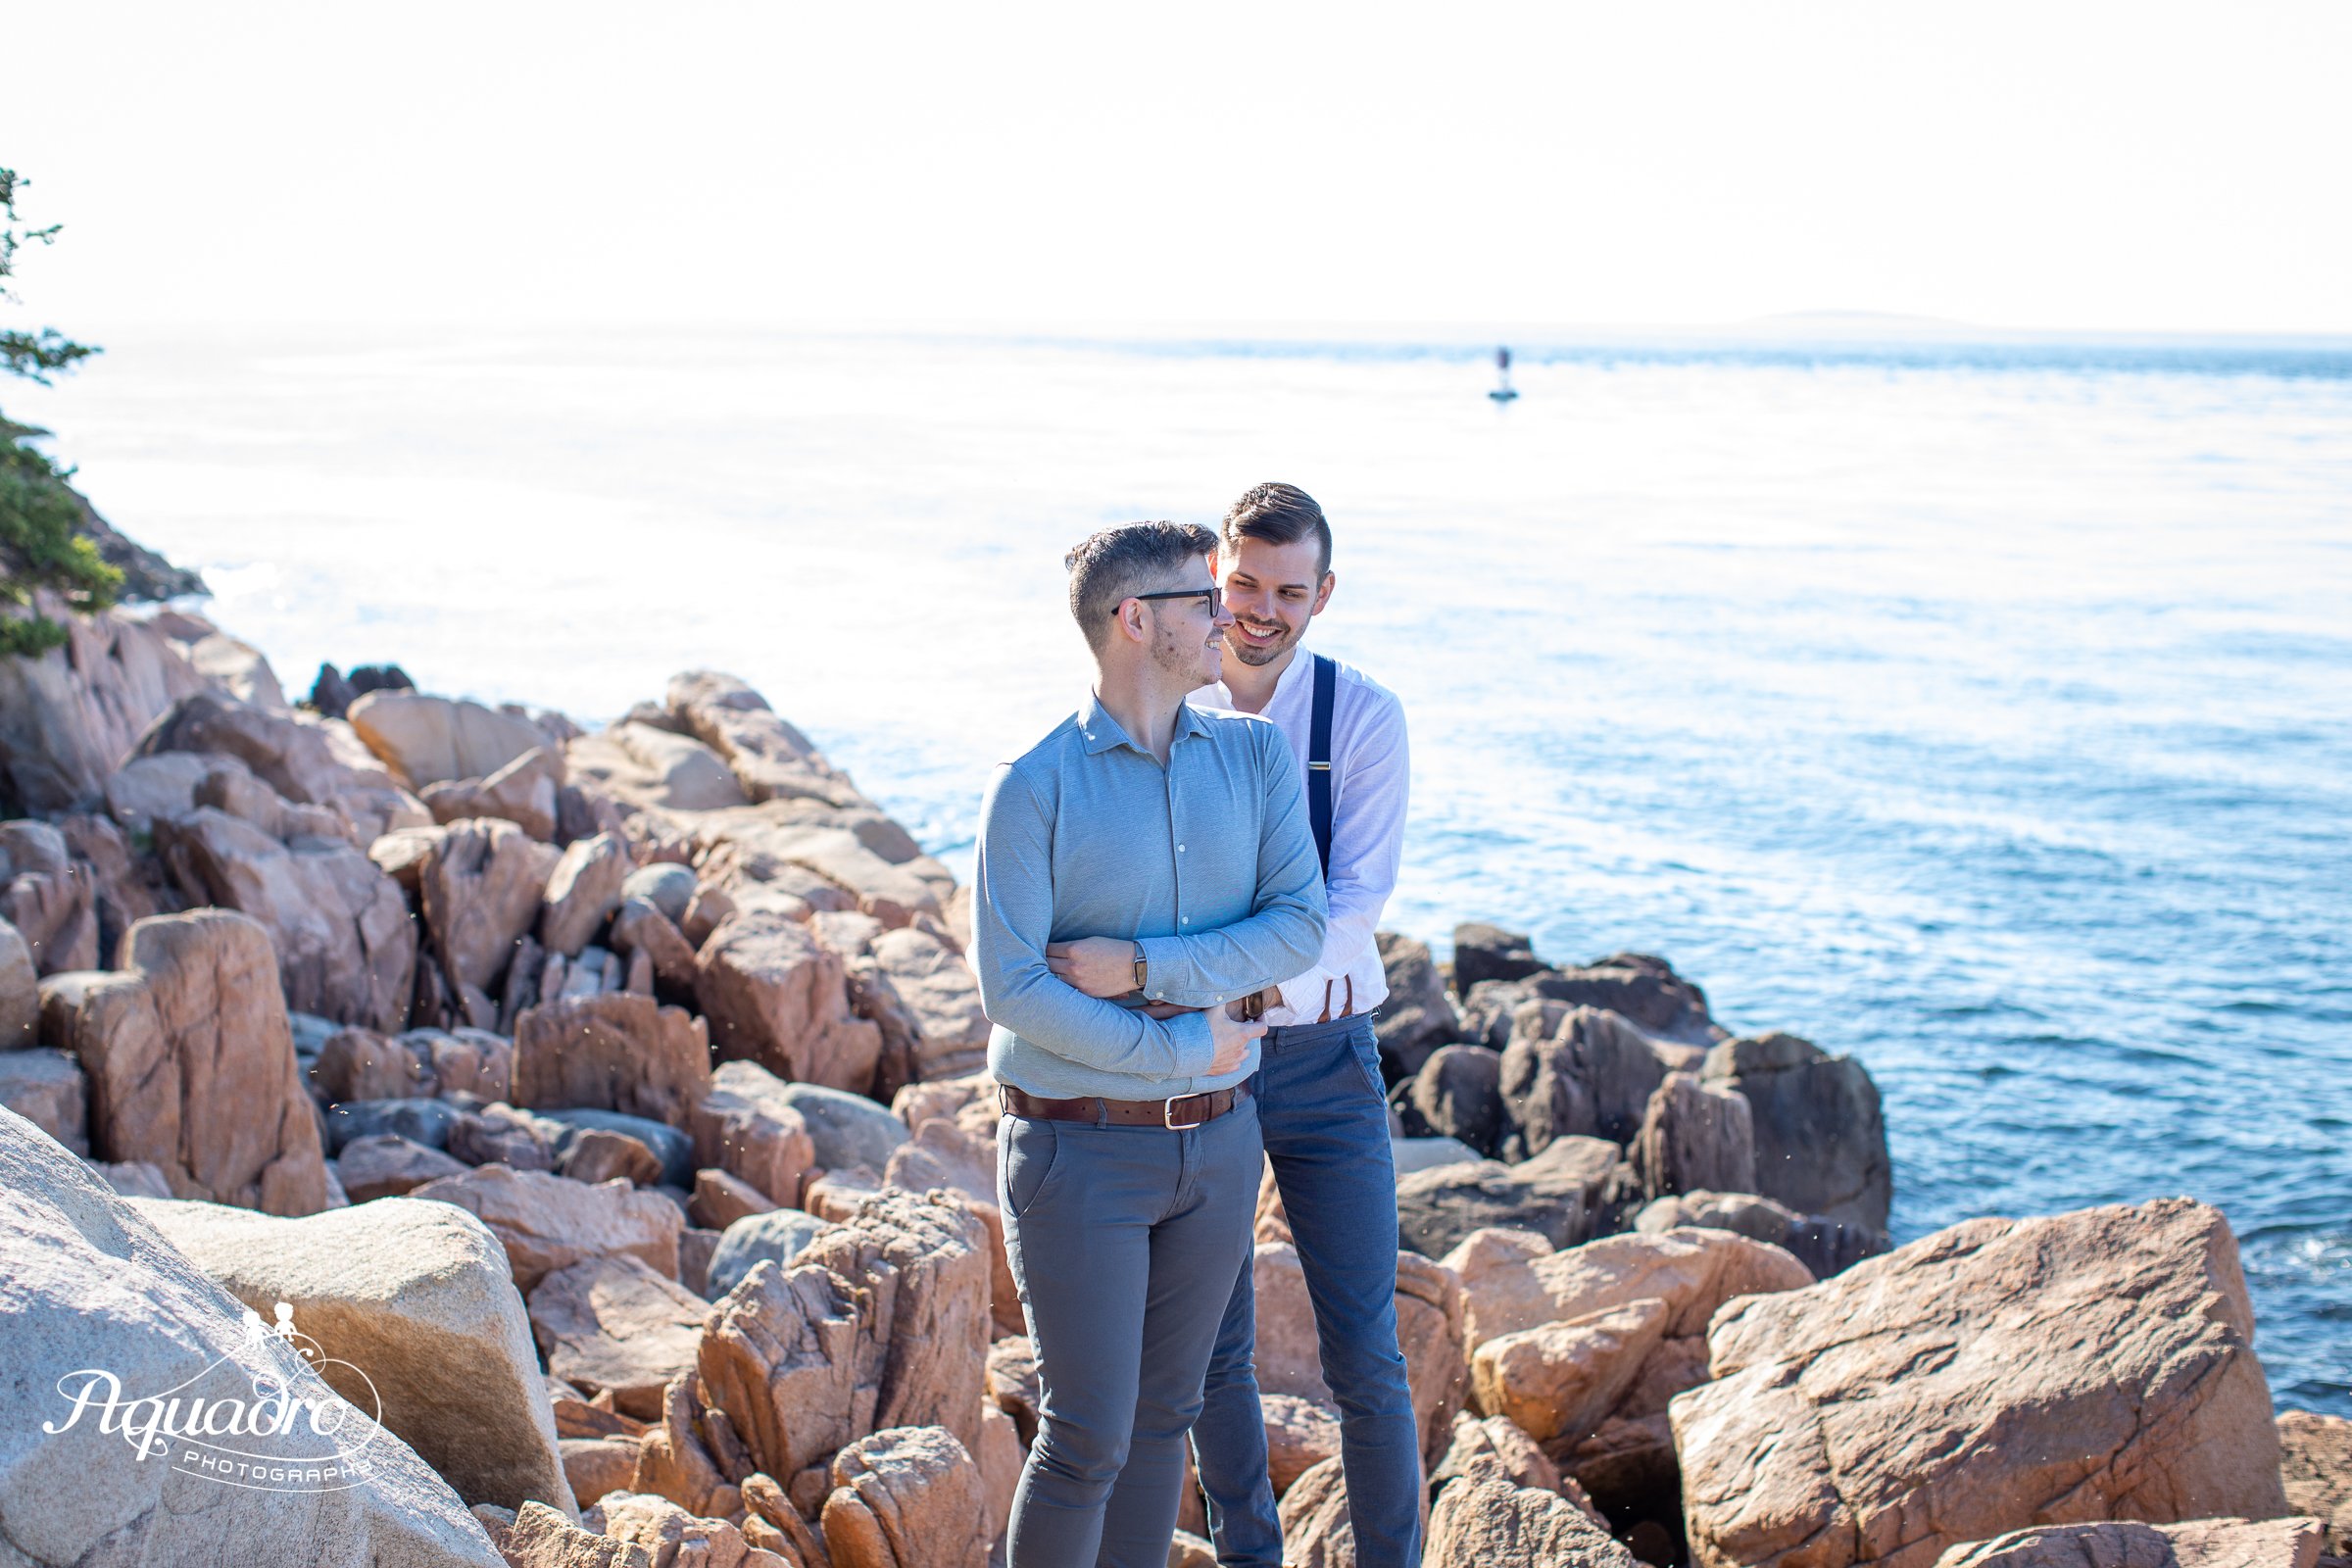 Engagement Session on rocky beach and near lighthouse in Maine